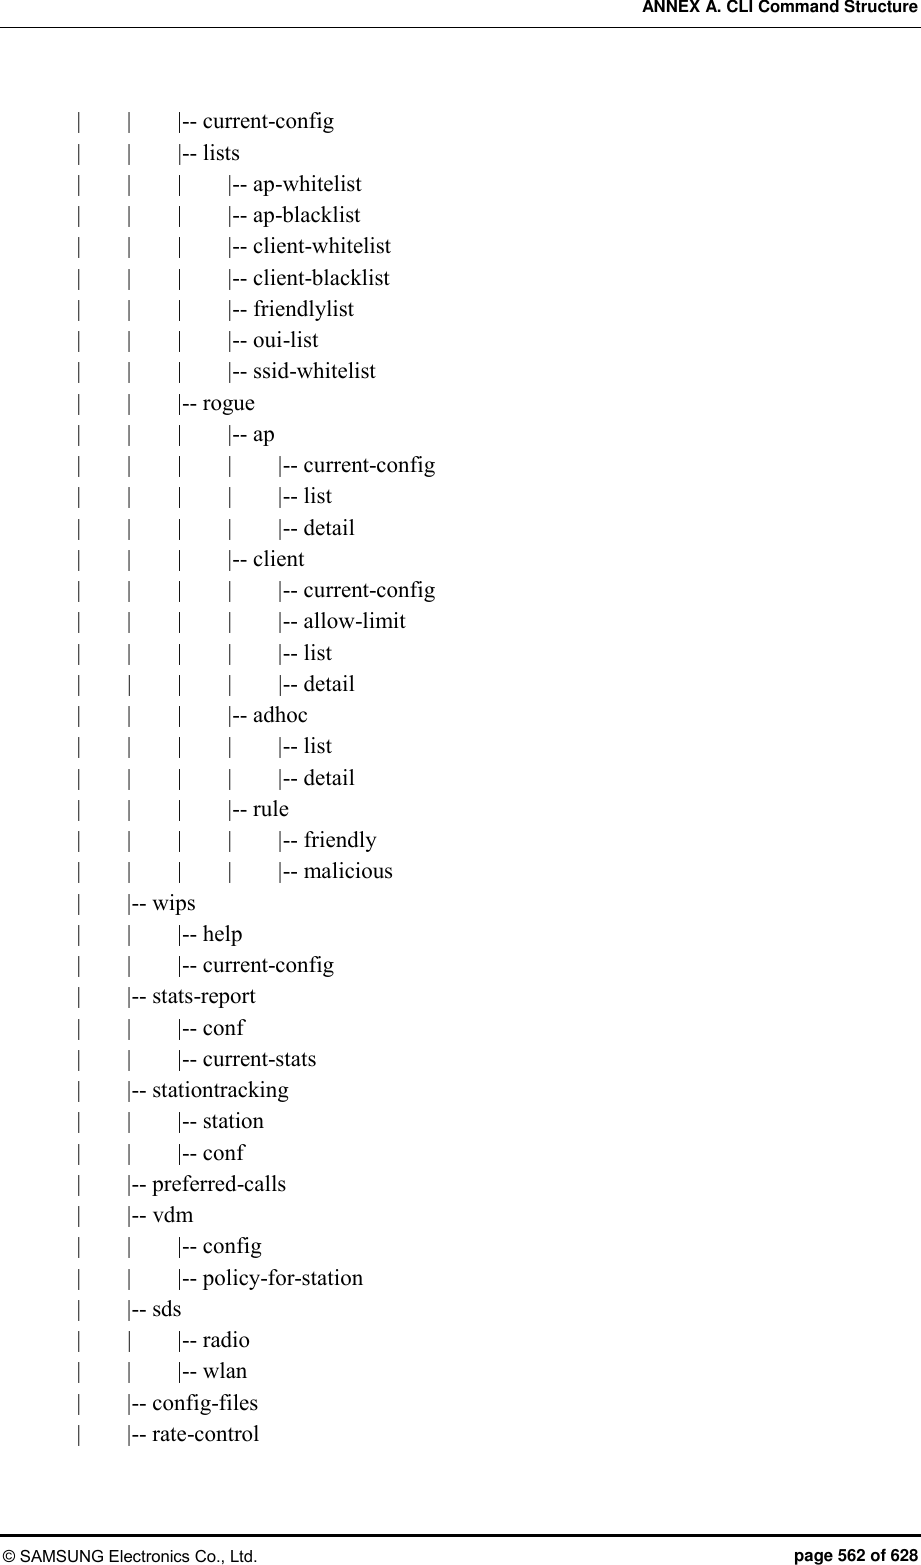 ANNEX A. CLI Command Structure © SAMSUNG Electronics Co., Ltd.  page 562 of 628 |        |        |-- current-config |        |        |-- lists |        |        |        |-- ap-whitelist |        |        |        |-- ap-blacklist |        |        |        |-- client-whitelist |        |        |        |-- client-blacklist |        |        |        |-- friendlylist |        |        |        |-- oui-list |        |        |        |-- ssid-whitelist |        |        |-- rogue |        |        |        |-- ap |        |        |        |        |-- current-config |        |        |        |        |-- list |        |        |        |        |-- detail |        |        |        |-- client |        |        |        |        |-- current-config |        |        |        |        |-- allow-limit |        |        |        |        |-- list |    |        |        |        |-- detail |        |        |        |-- adhoc |        |        |        |        |-- list |        |        |        |        |-- detail |        |        |        |-- rule |        |        |        |        |-- friendly |        |        |        |        |-- malicious |        |-- wips |        |        |-- help |        |        |-- current-config |        |-- stats-report |        |        |-- conf |        |        |-- current-stats |        |-- stationtracking |        |        |-- station |        |        |-- conf |        |-- preferred-calls |        |-- vdm |        |        |-- config |        |        |-- policy-for-station |        |-- sds |        |        |-- radio |        |        |-- wlan |        |-- config-files |        |-- rate-control 